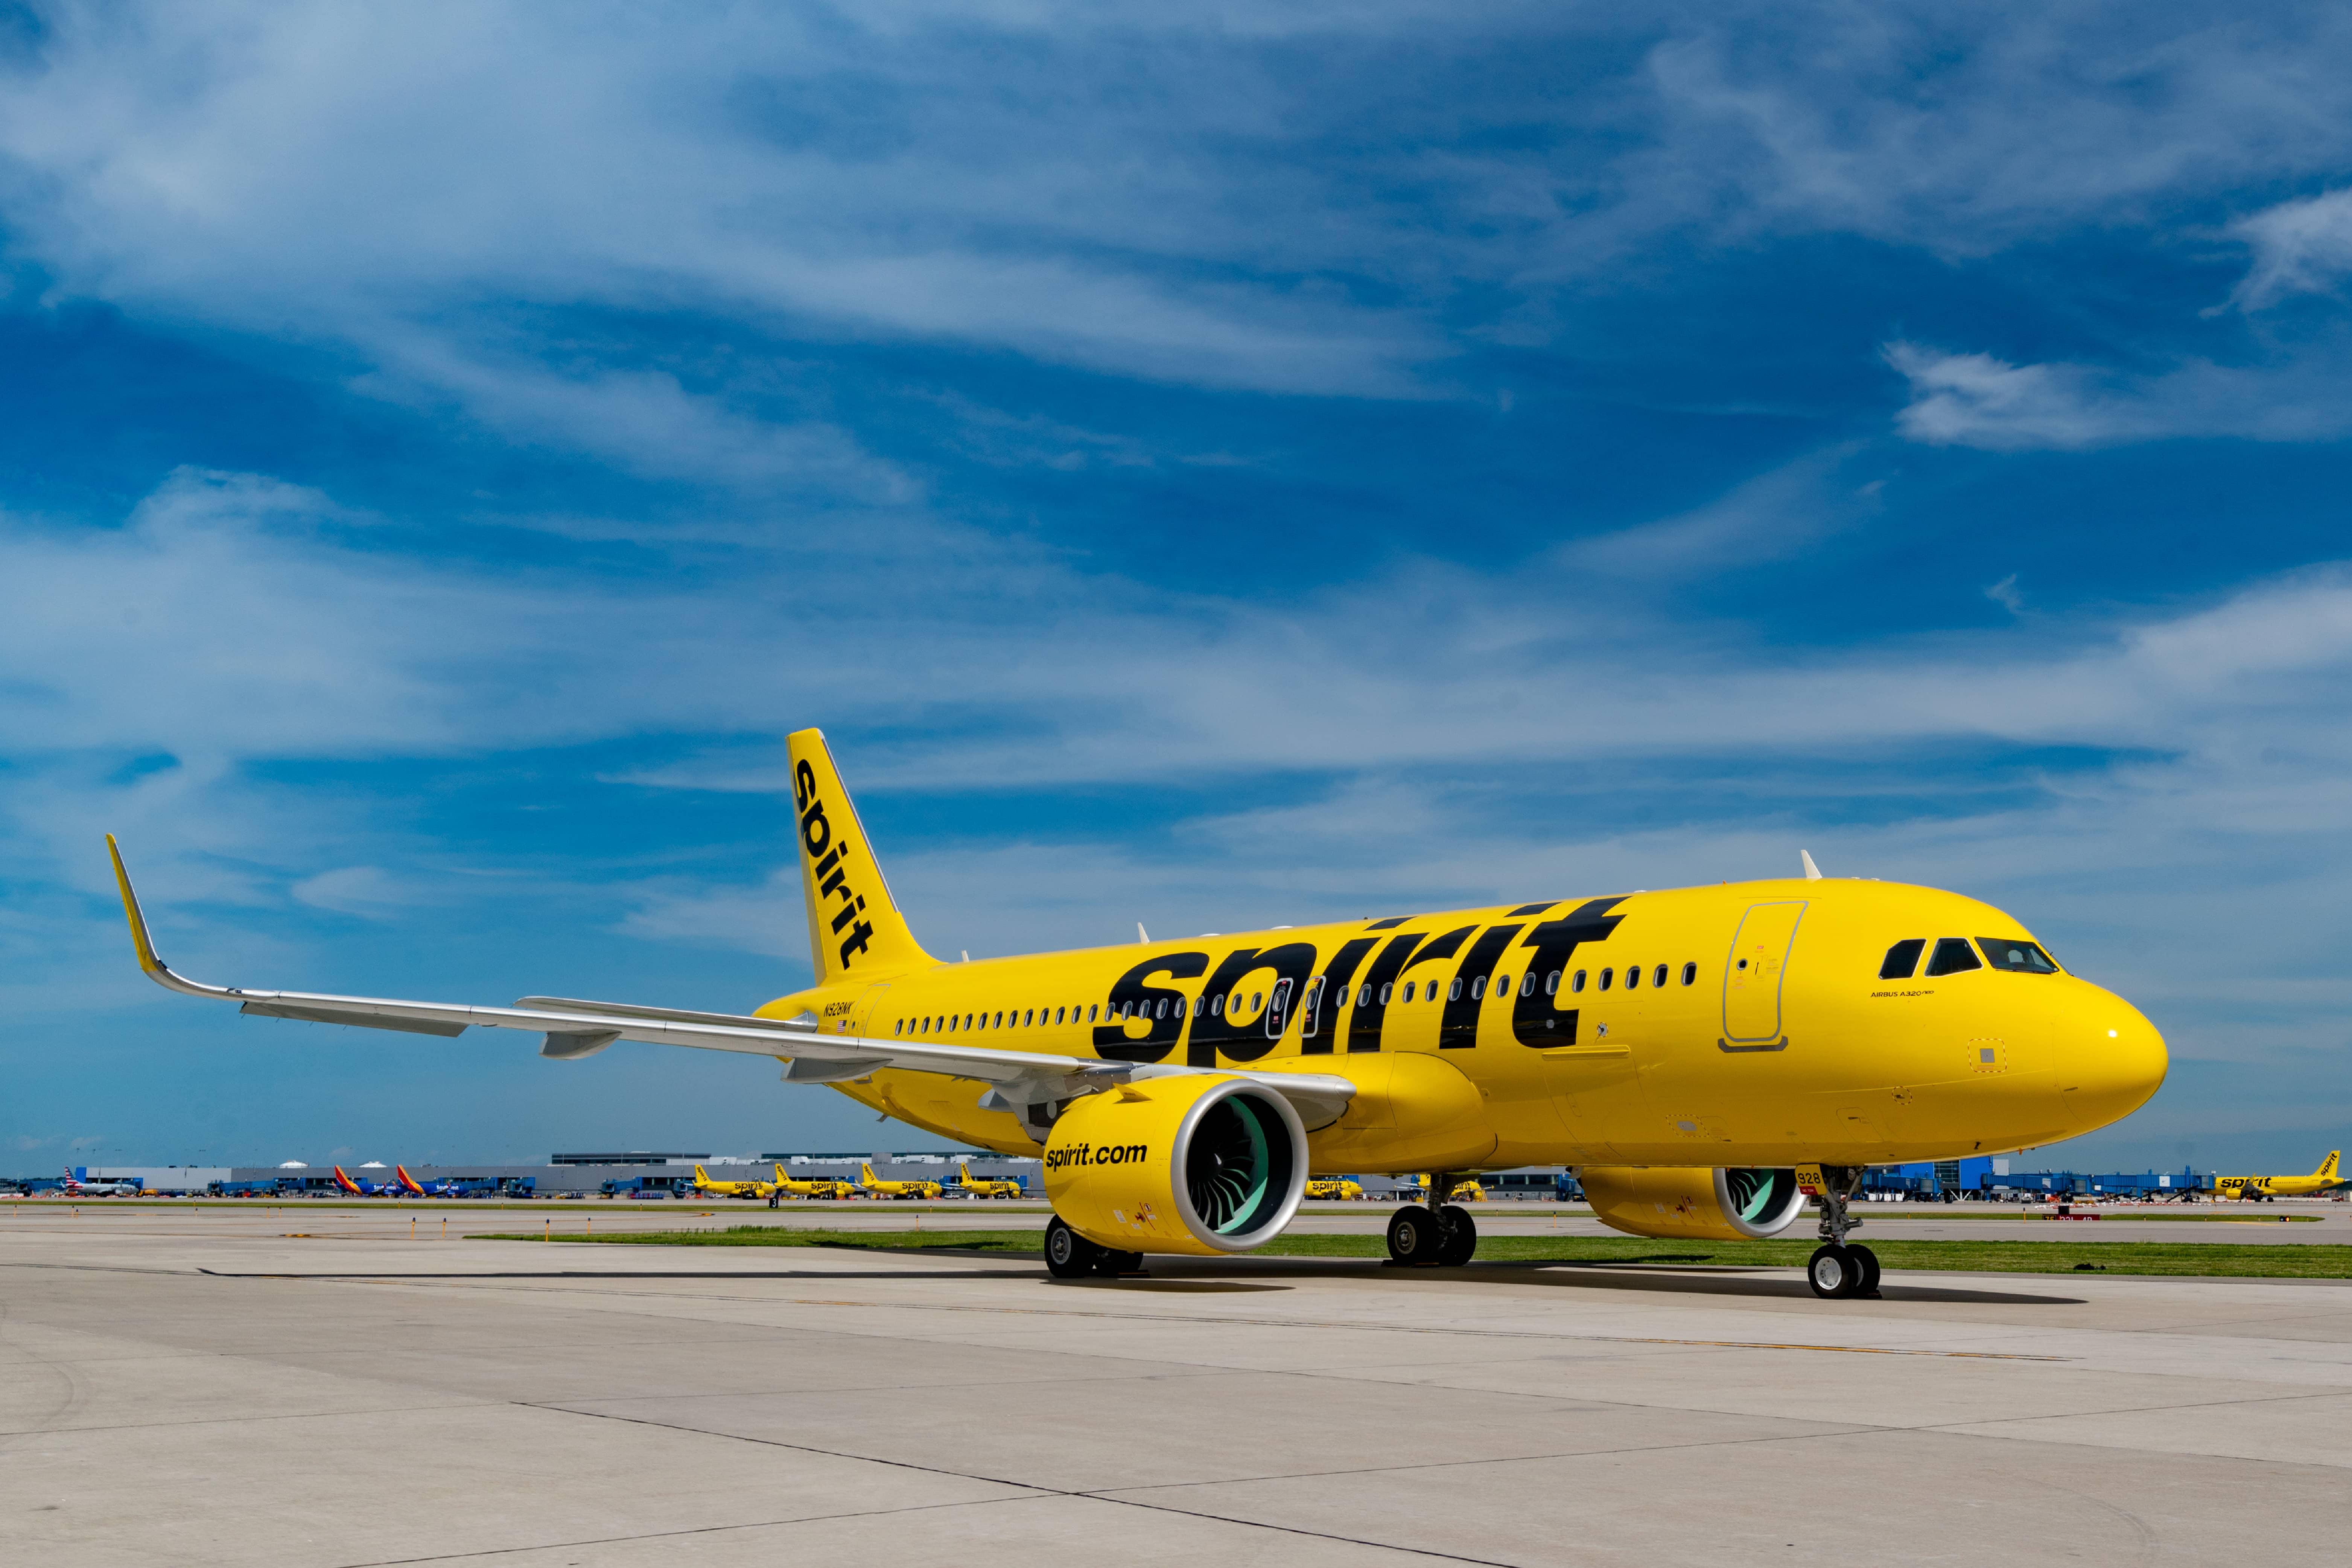 Spirit Airlines flight bound for FLL airport makes emergency landing after mechanical issue - WSVN 7News | Miami News, Weather, Sports | Fort Lauderdale